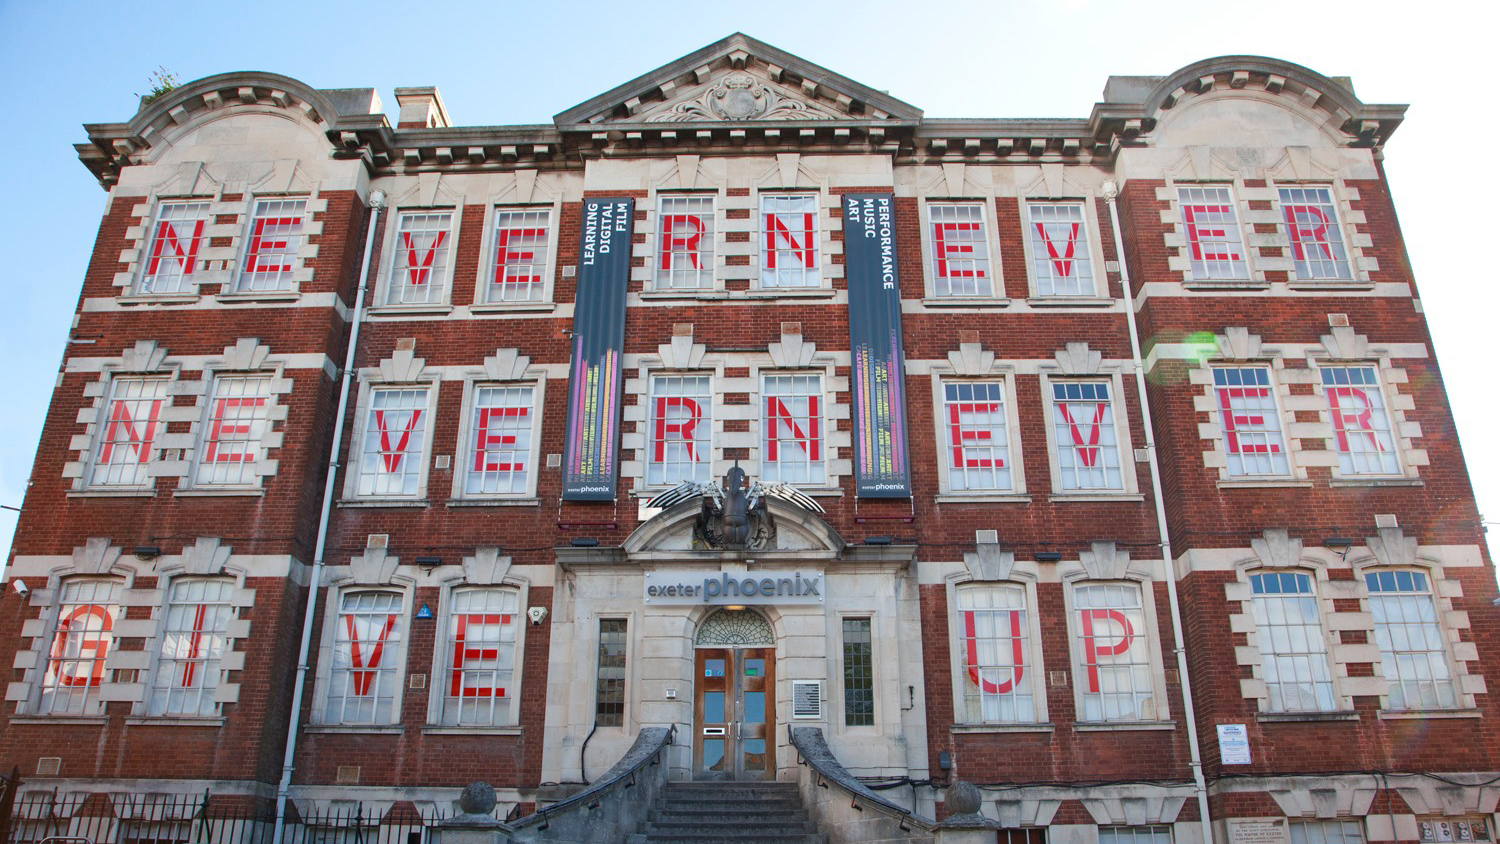 Photograph of Exeter Phoenix whose windows spell out Never Never Never Give Up